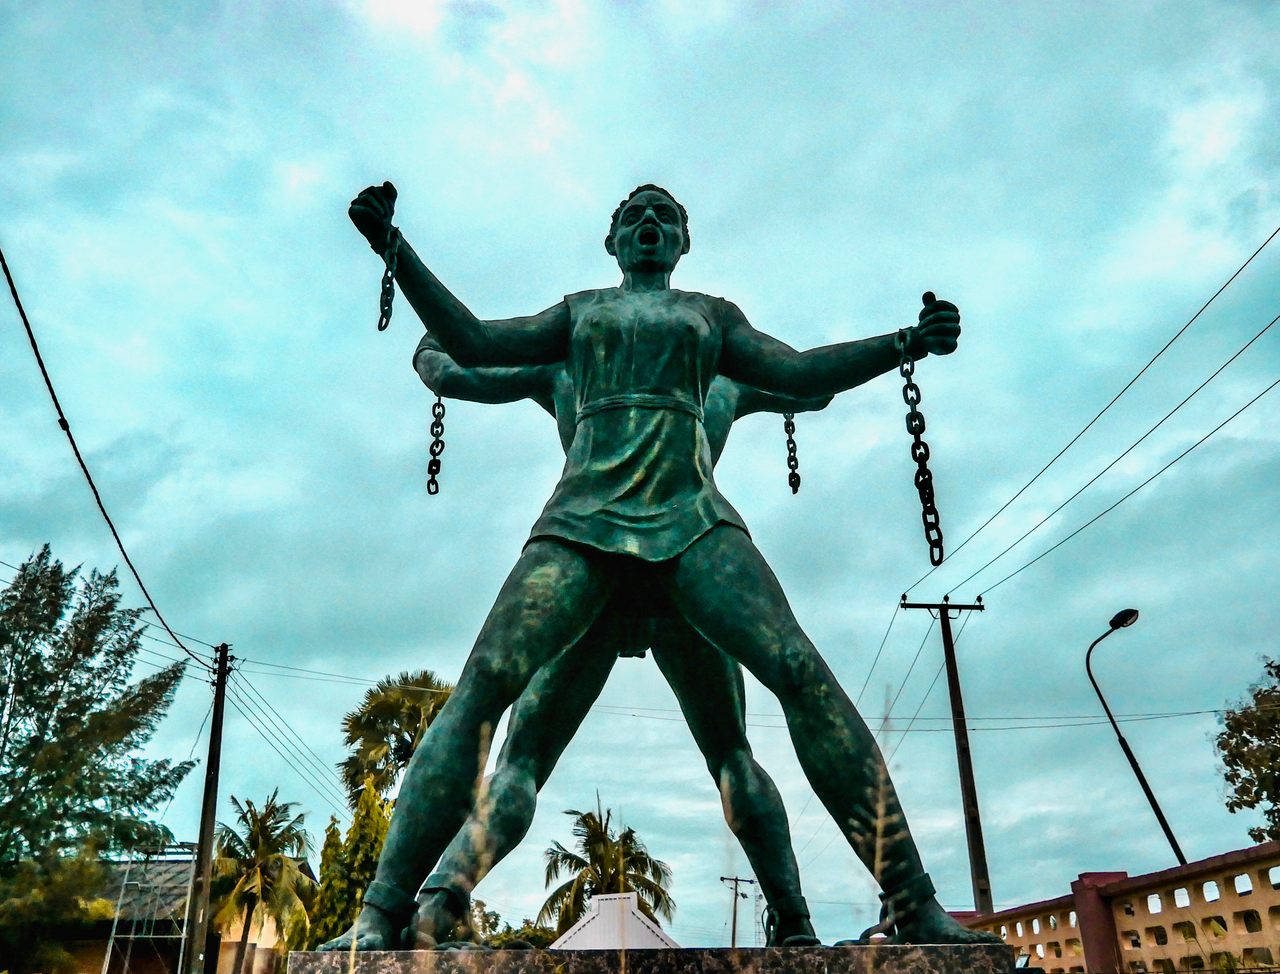 This colossal freedom statue stands in front of Nigeria's Badagry Heritage Museum in Lagos State. Badgery, a small town near Nigeria's border with Benin, was the site of a large slave port.